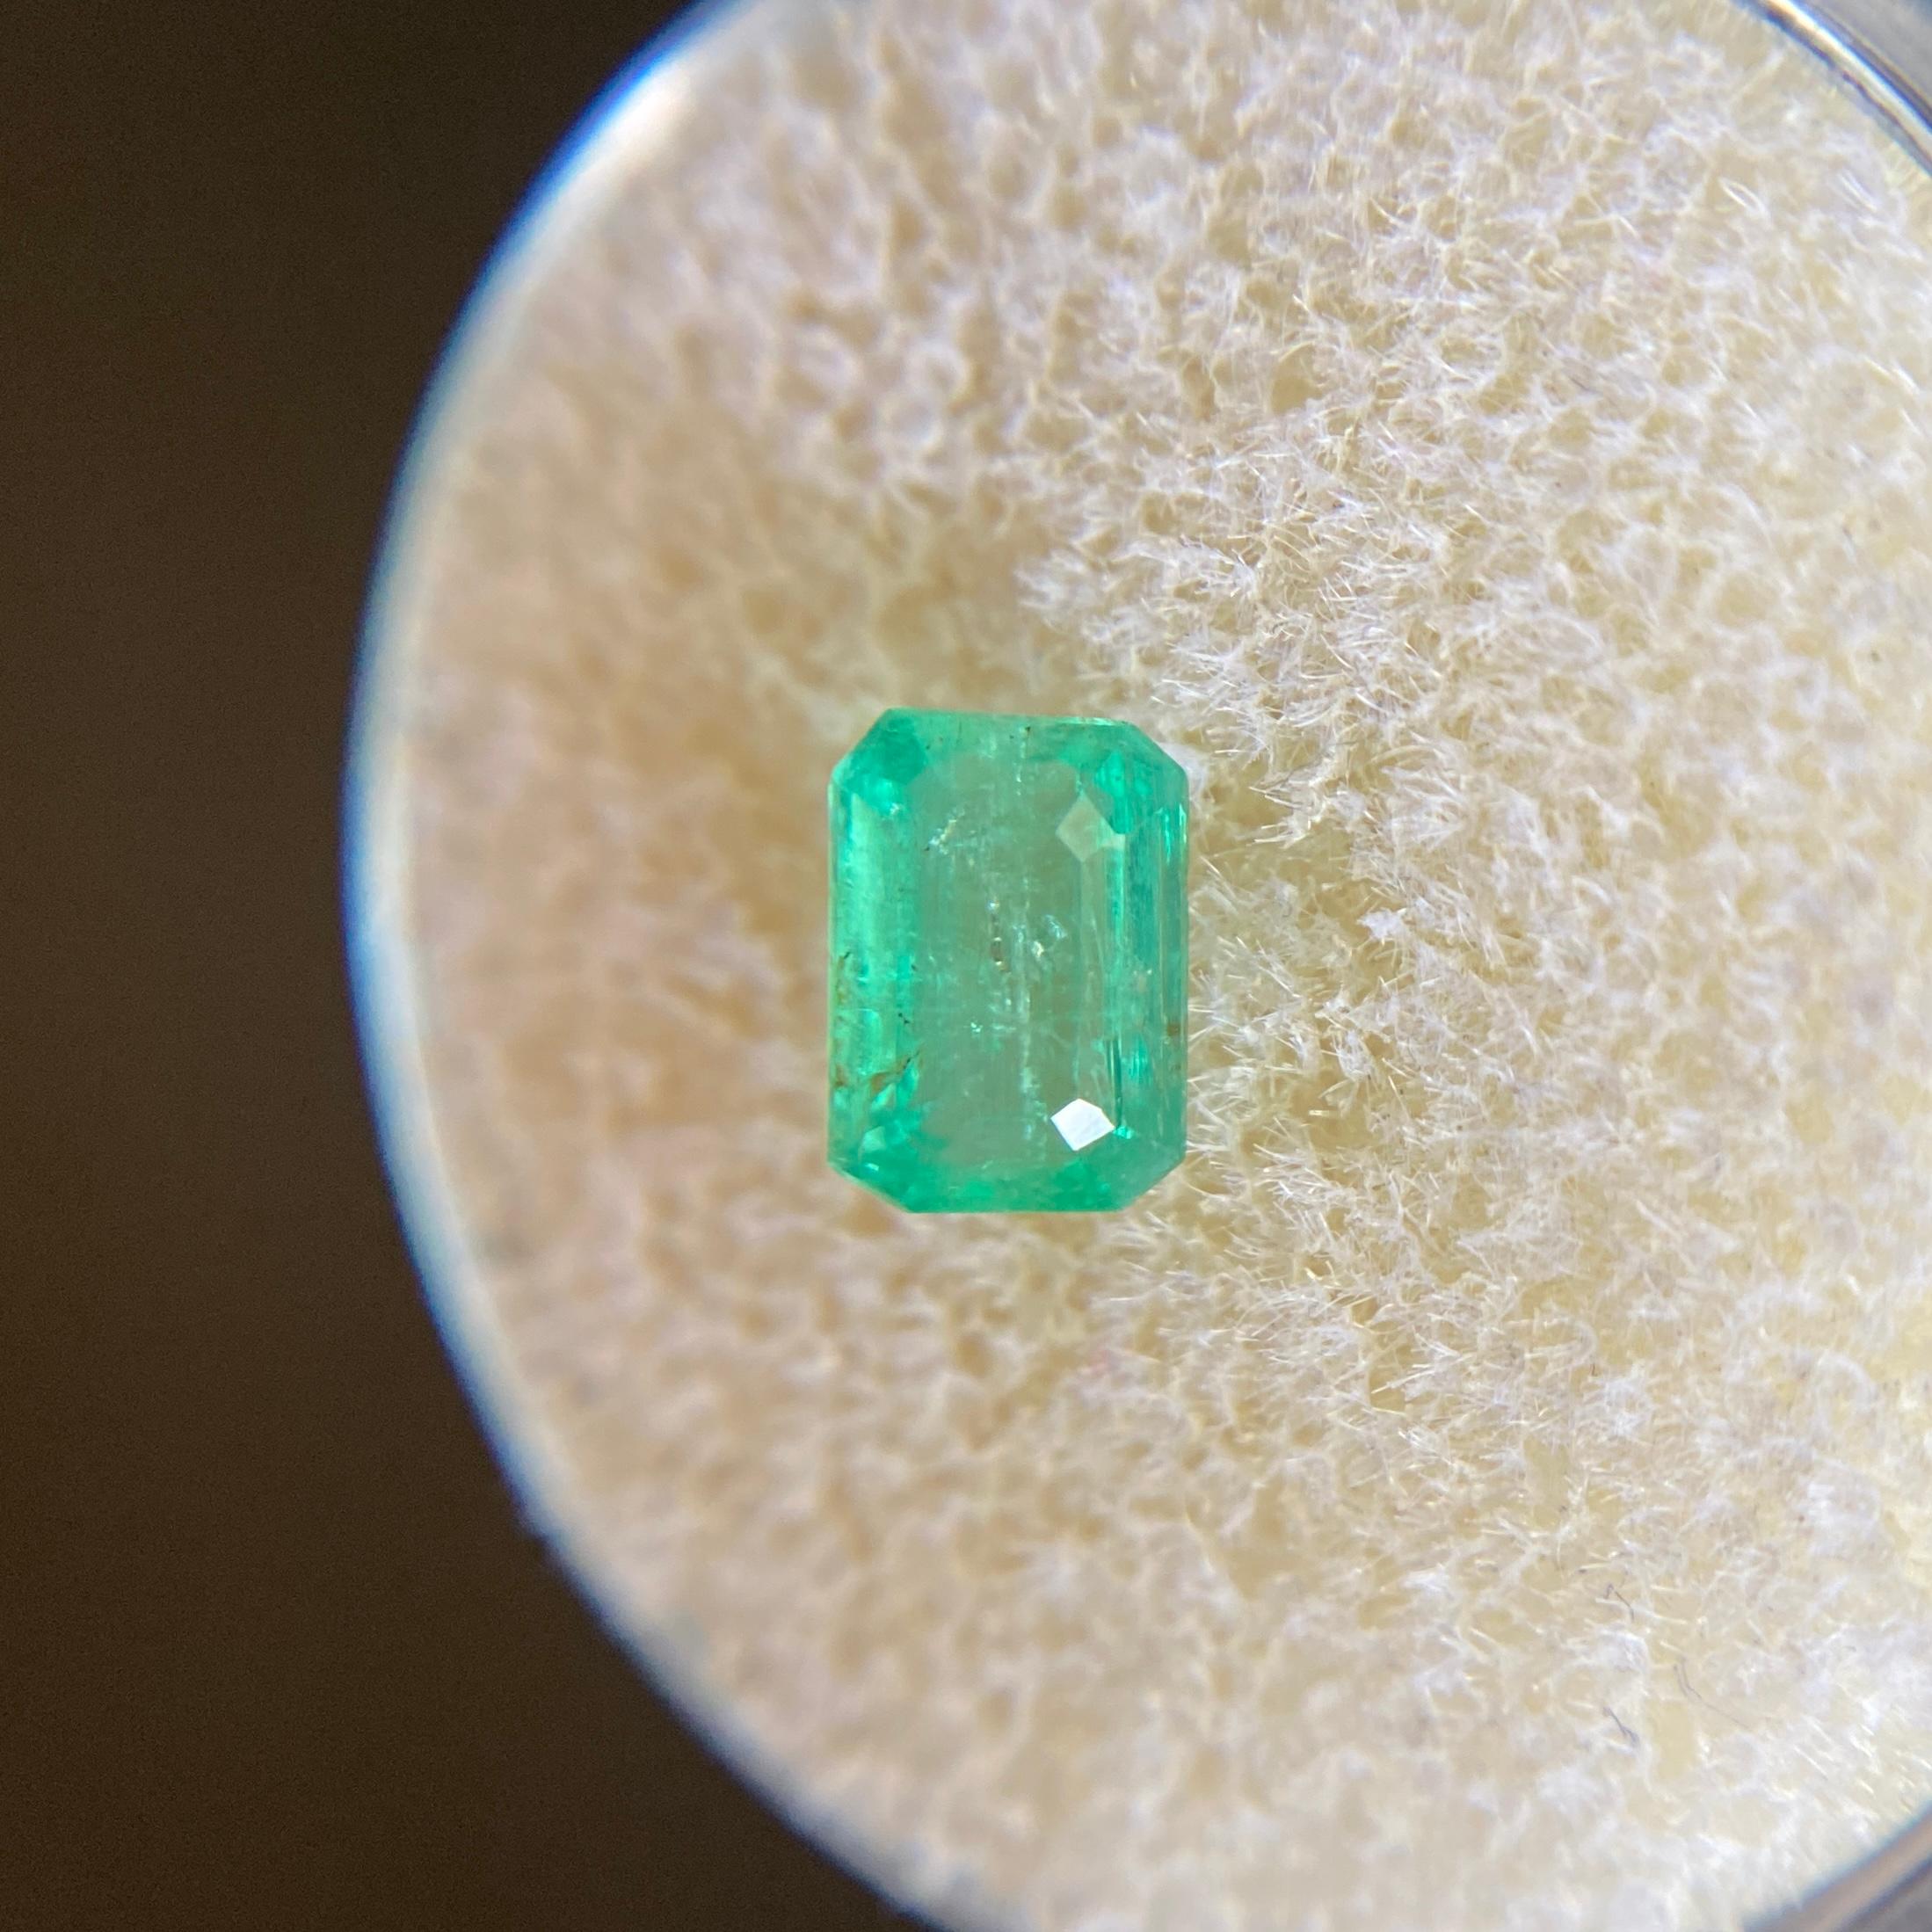 Natural Green Emerald Gemstone.

Beautiful 0.86 carat emerald with a bright green colour and very good emerald/octagonal cut.

The clarity on this stone is good.

Emeralds are typically highly included stones and so inclusions are to be expected.